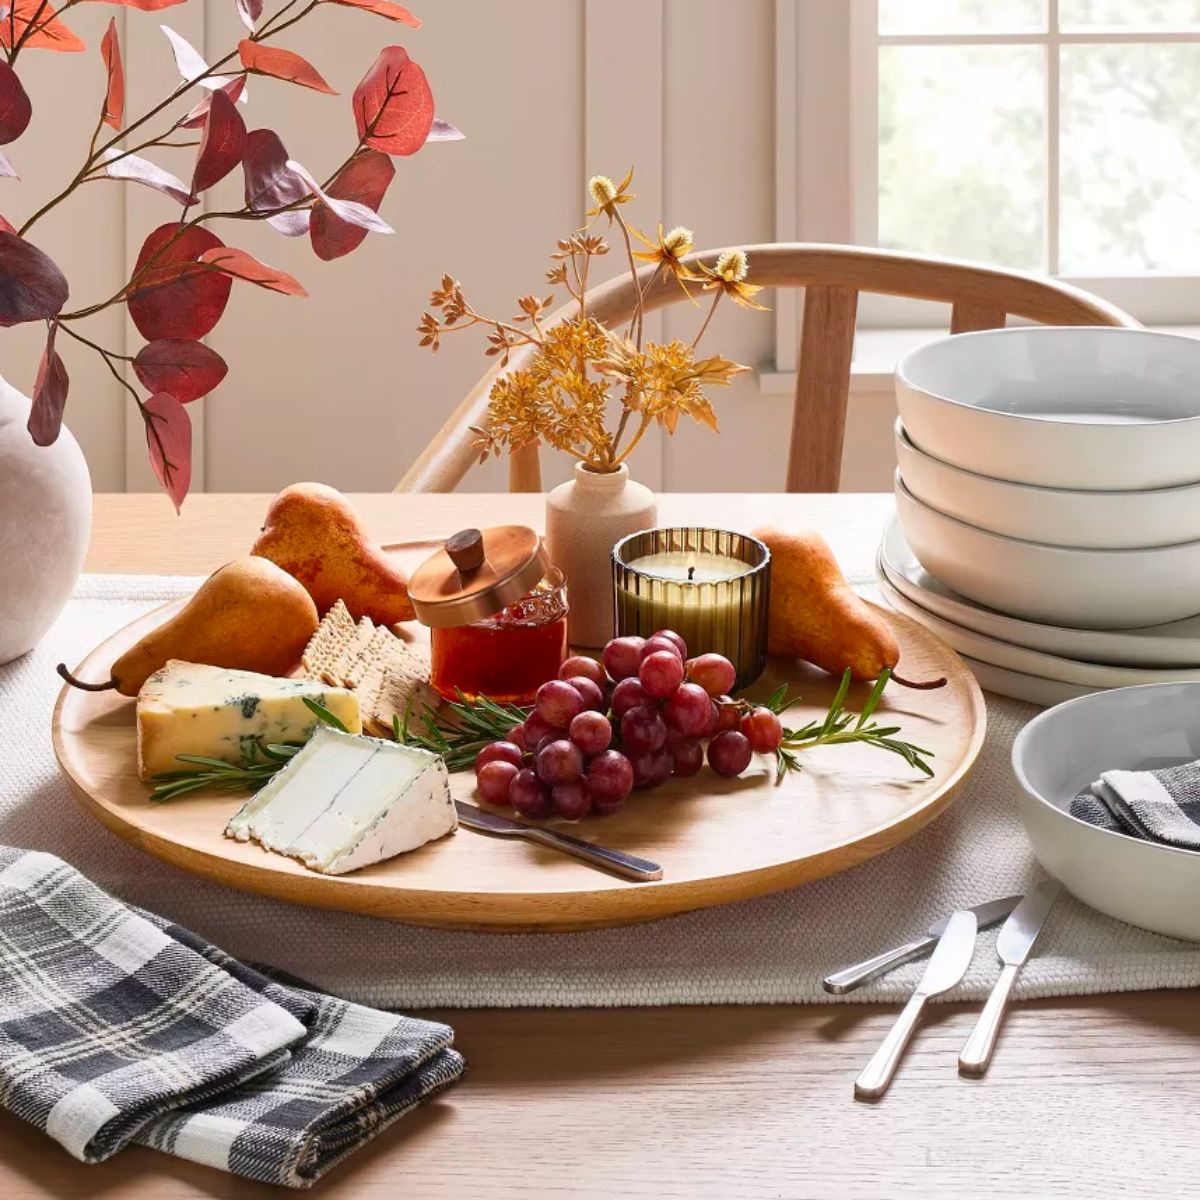 Magnolia Wooden Pedestal Lazy Susan in Natural with a selection of cheeses and grapes sitting on a dining table